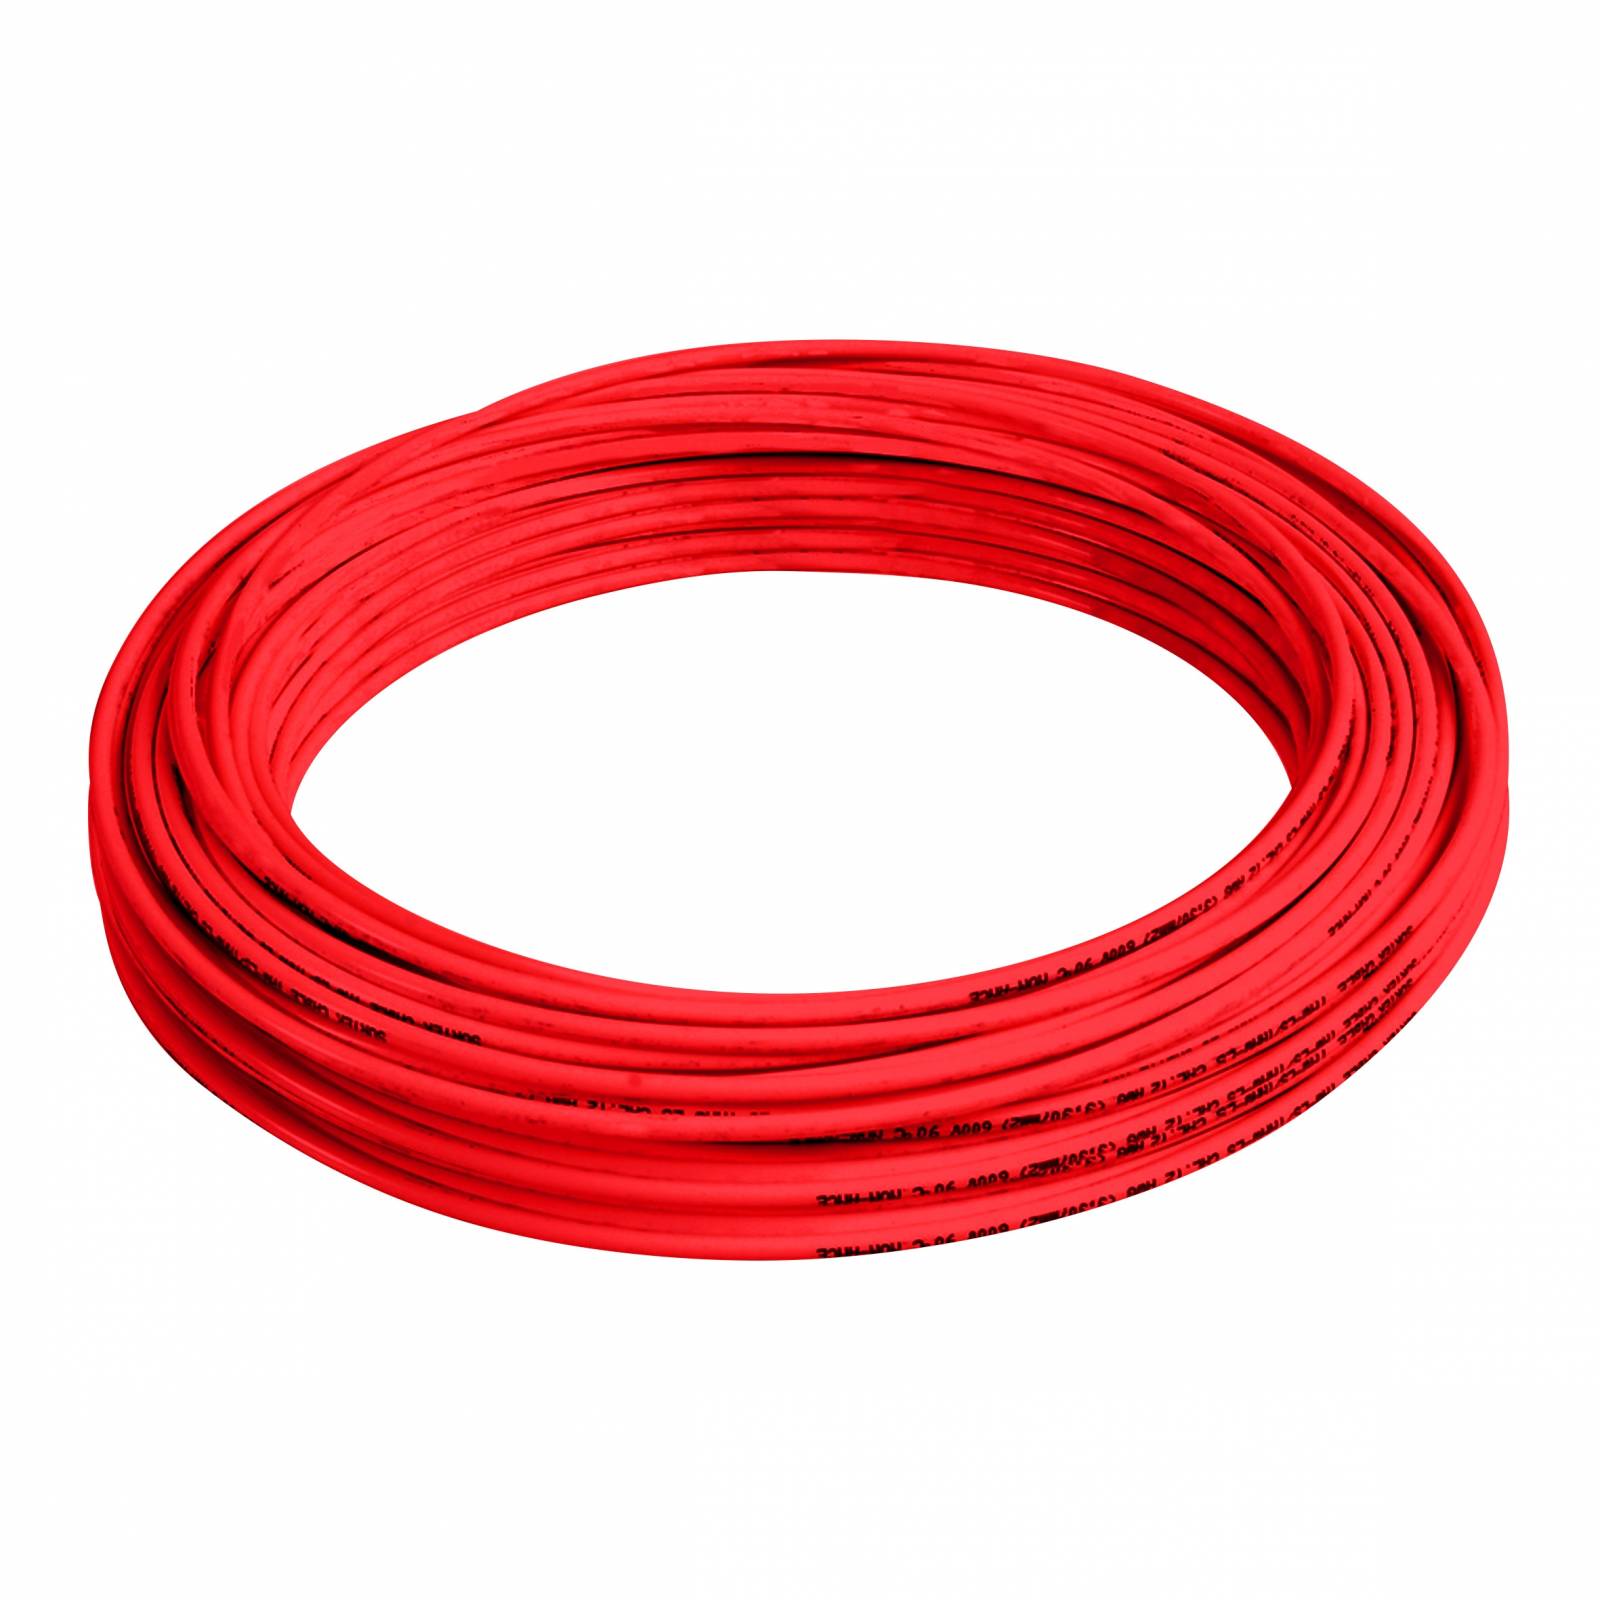 Cable Eléctrico Tipo Thw-ls/thhw-ls Cal.10 100m Rojo 136915 